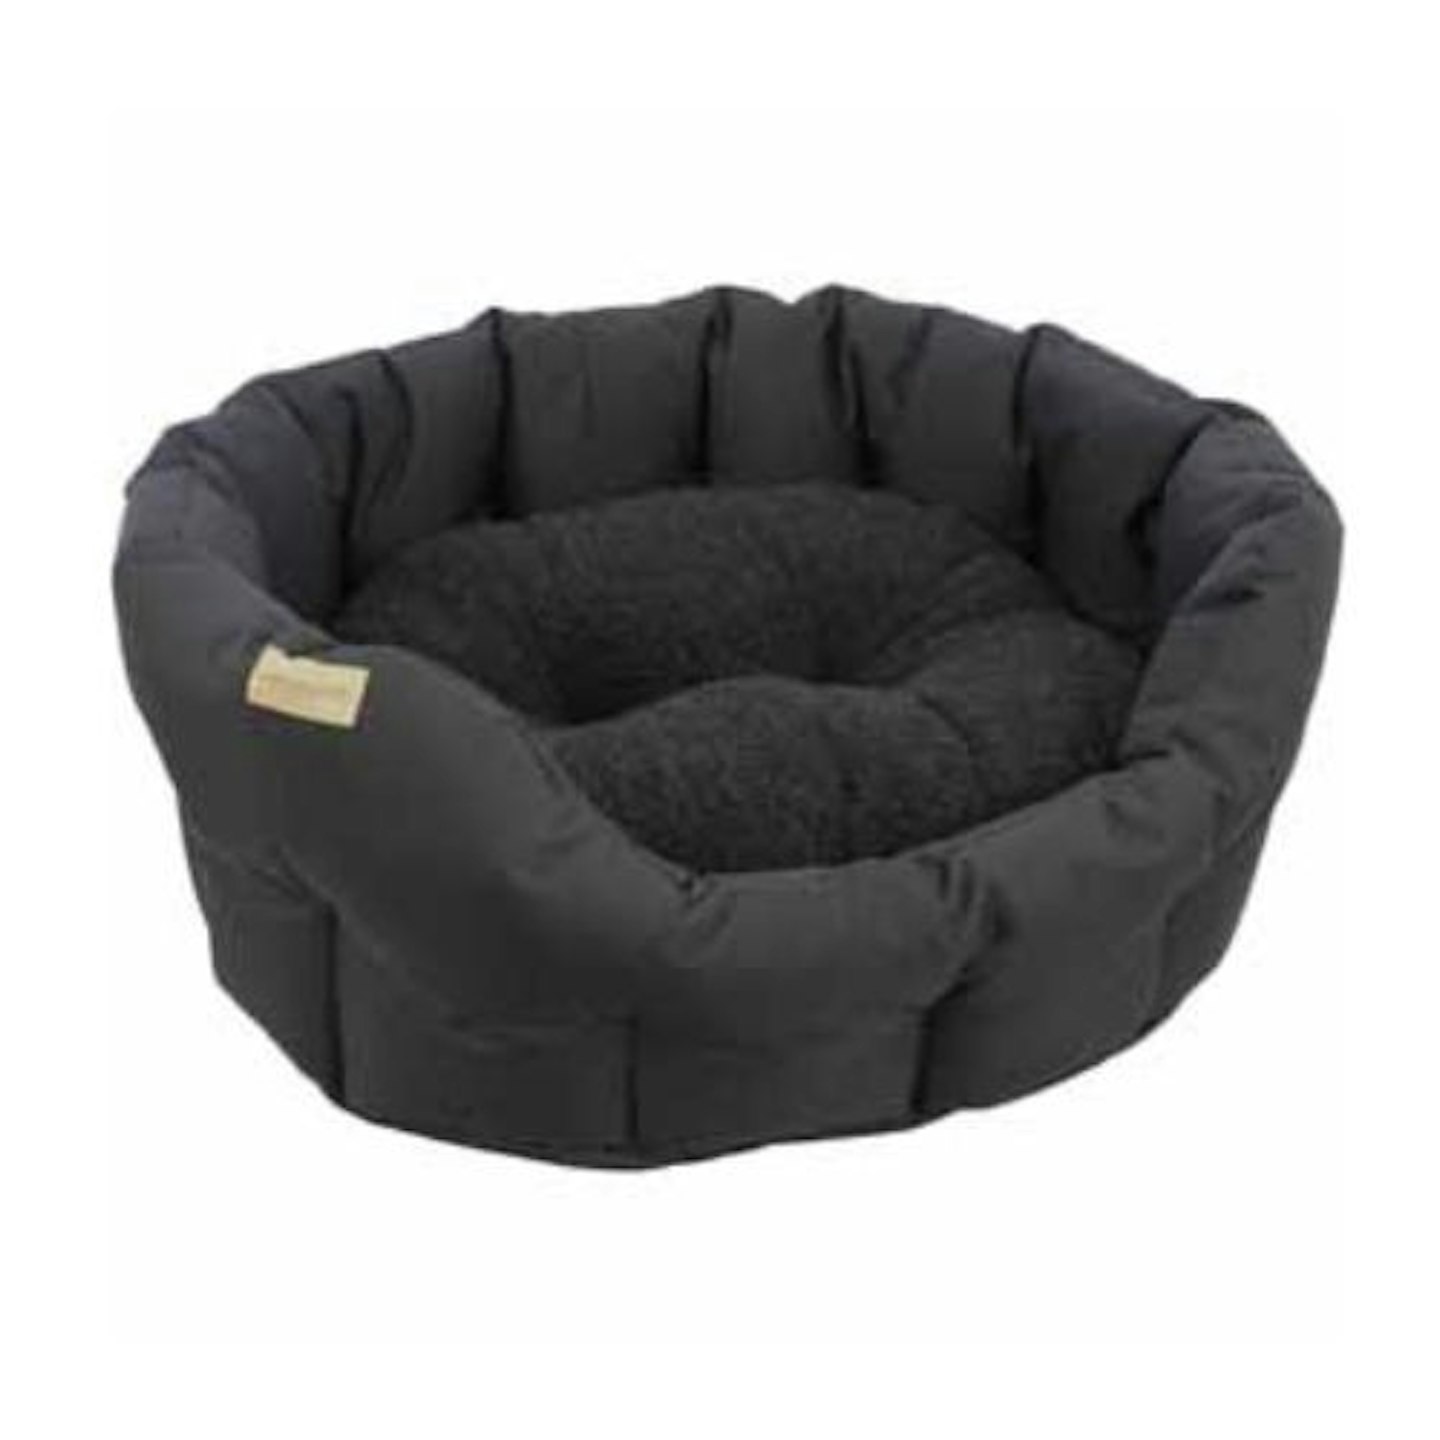 Earthbound Classic Waterproof Round Dog Bed